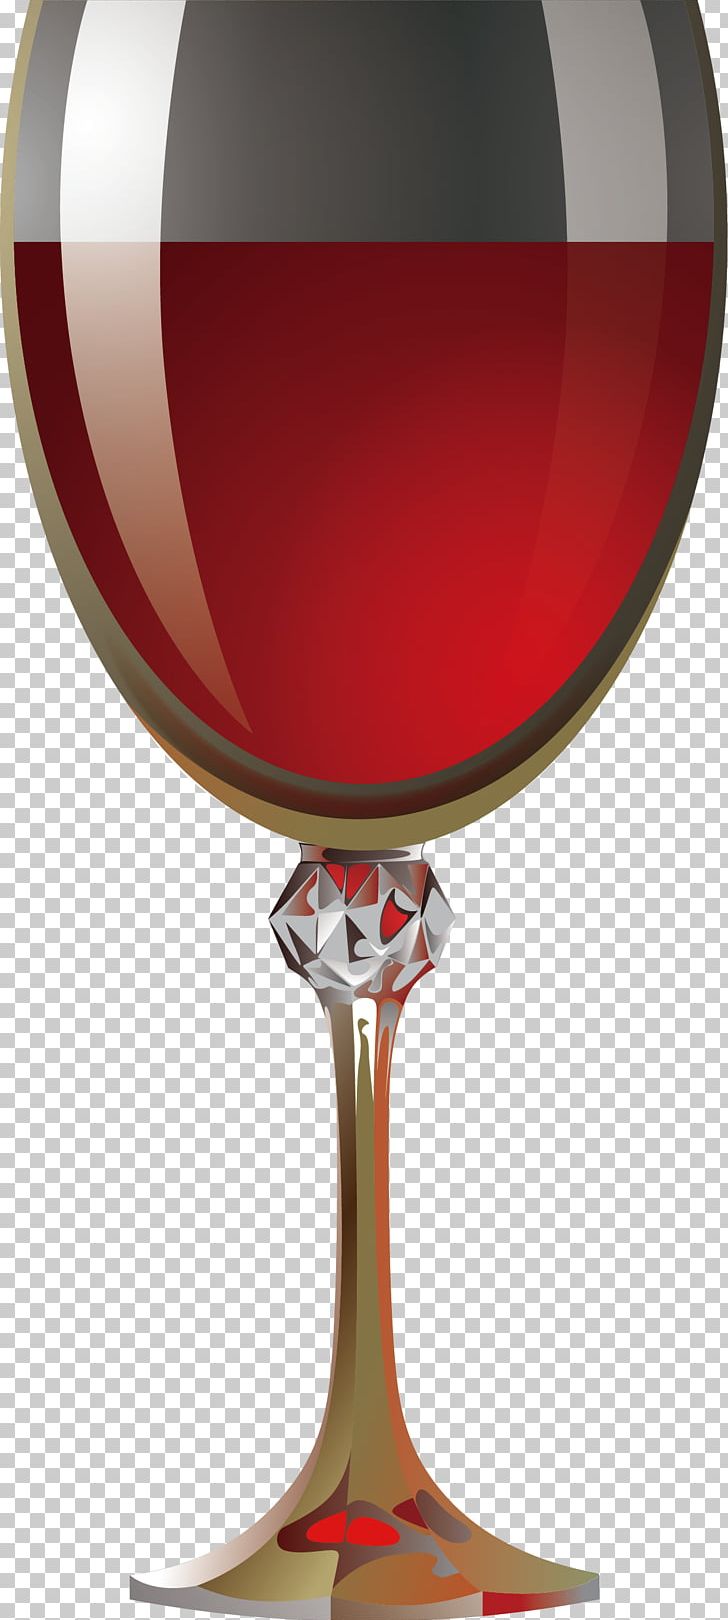 Red Wine Wine Glass Champagne Glass PNG, Clipart, Champagne Glass, Champagne Stemware, Cup, Download, Drinkware Free PNG Download